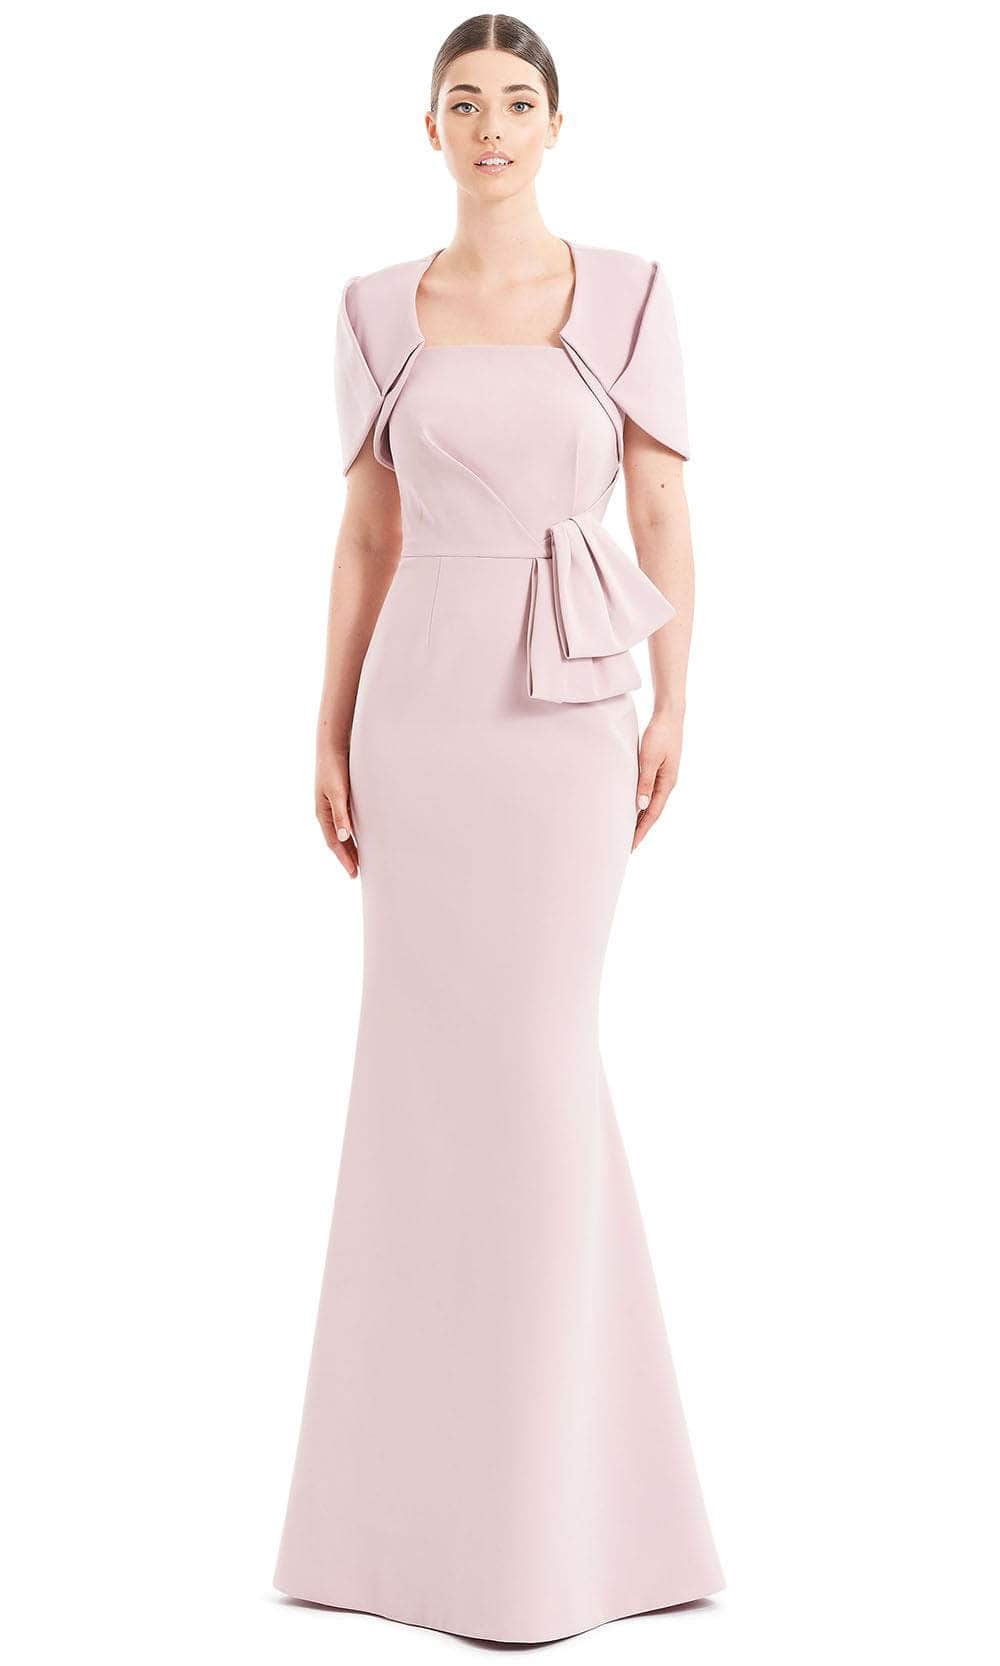 Alexander By Daymor 1656F22 - Strapless Peplum Formal Gown With Jacket Special Occasion Dress